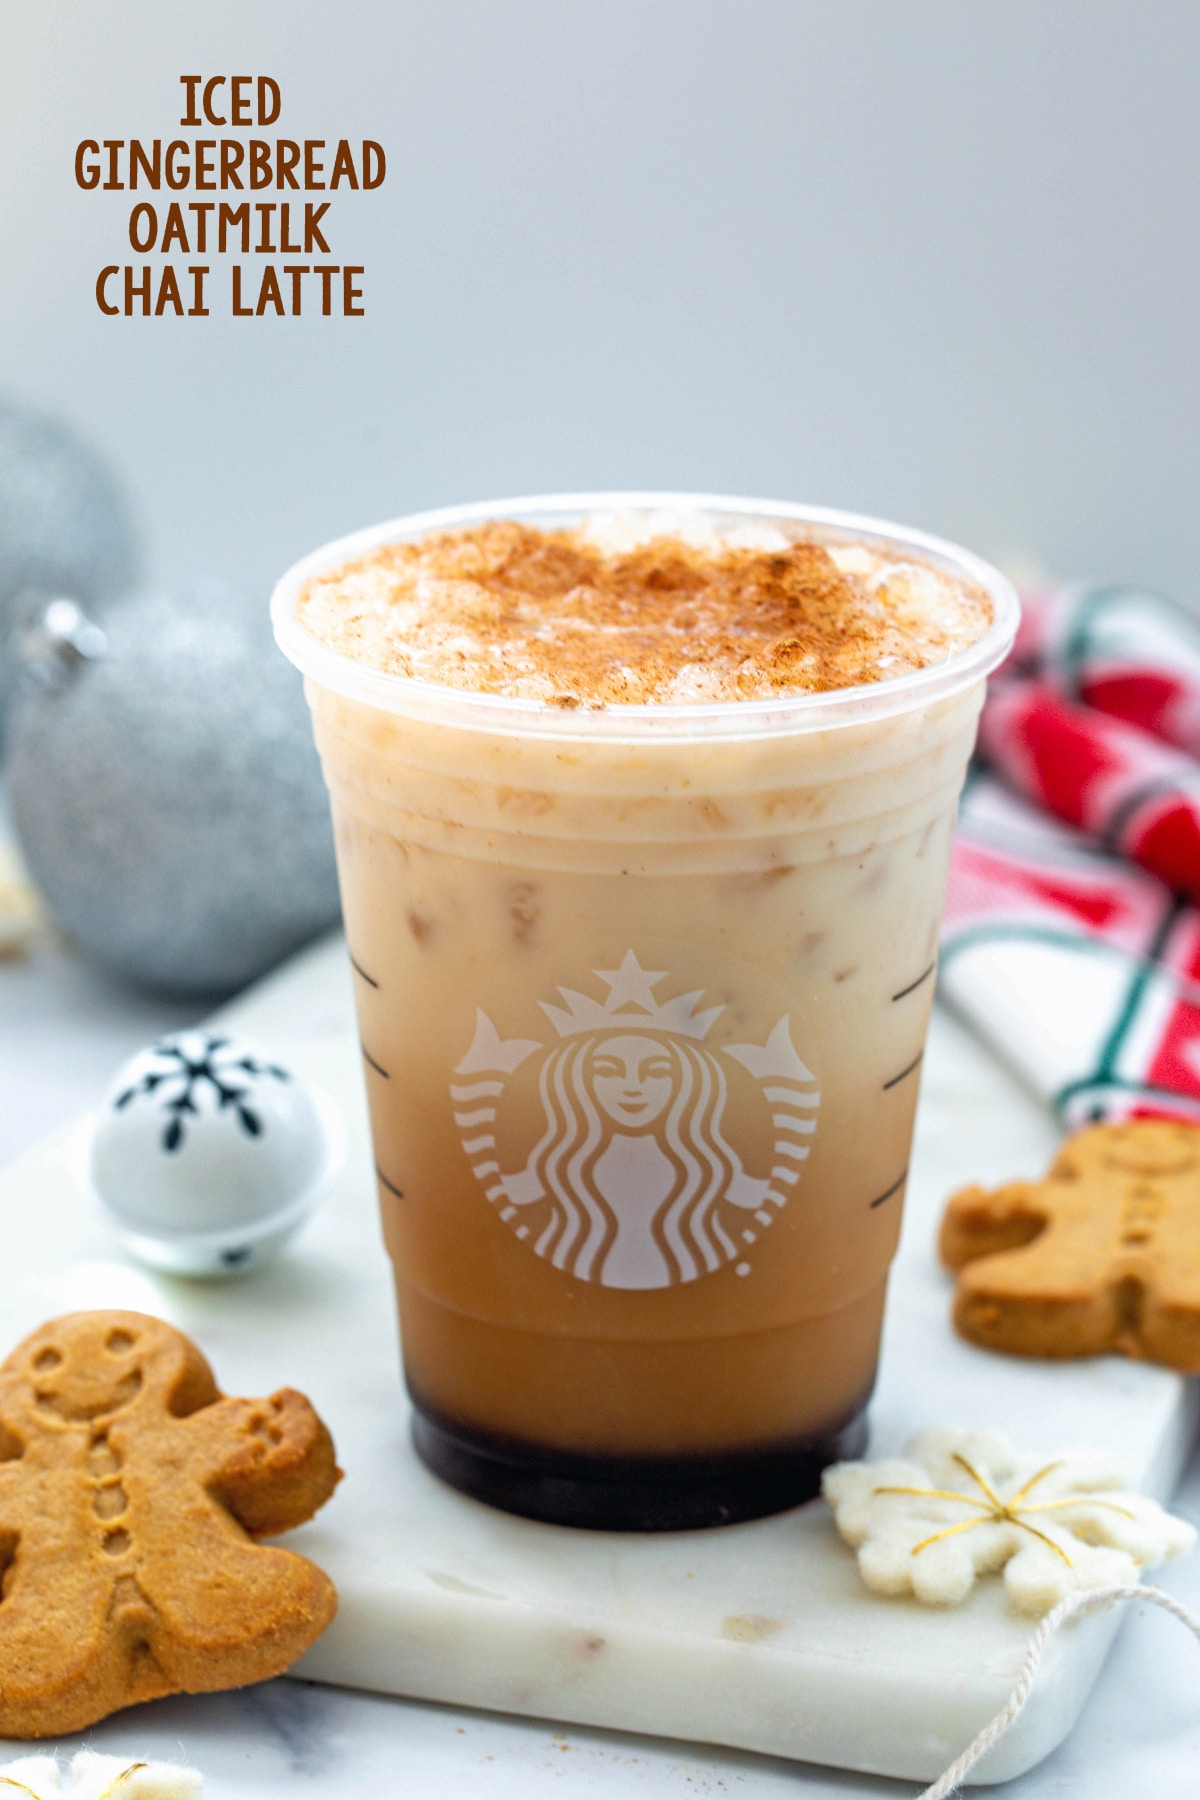 Iced Gingerbread Oatmilk Chai Latte in a Starbucks cup with gingerbread men cookies around and recipe title at top.